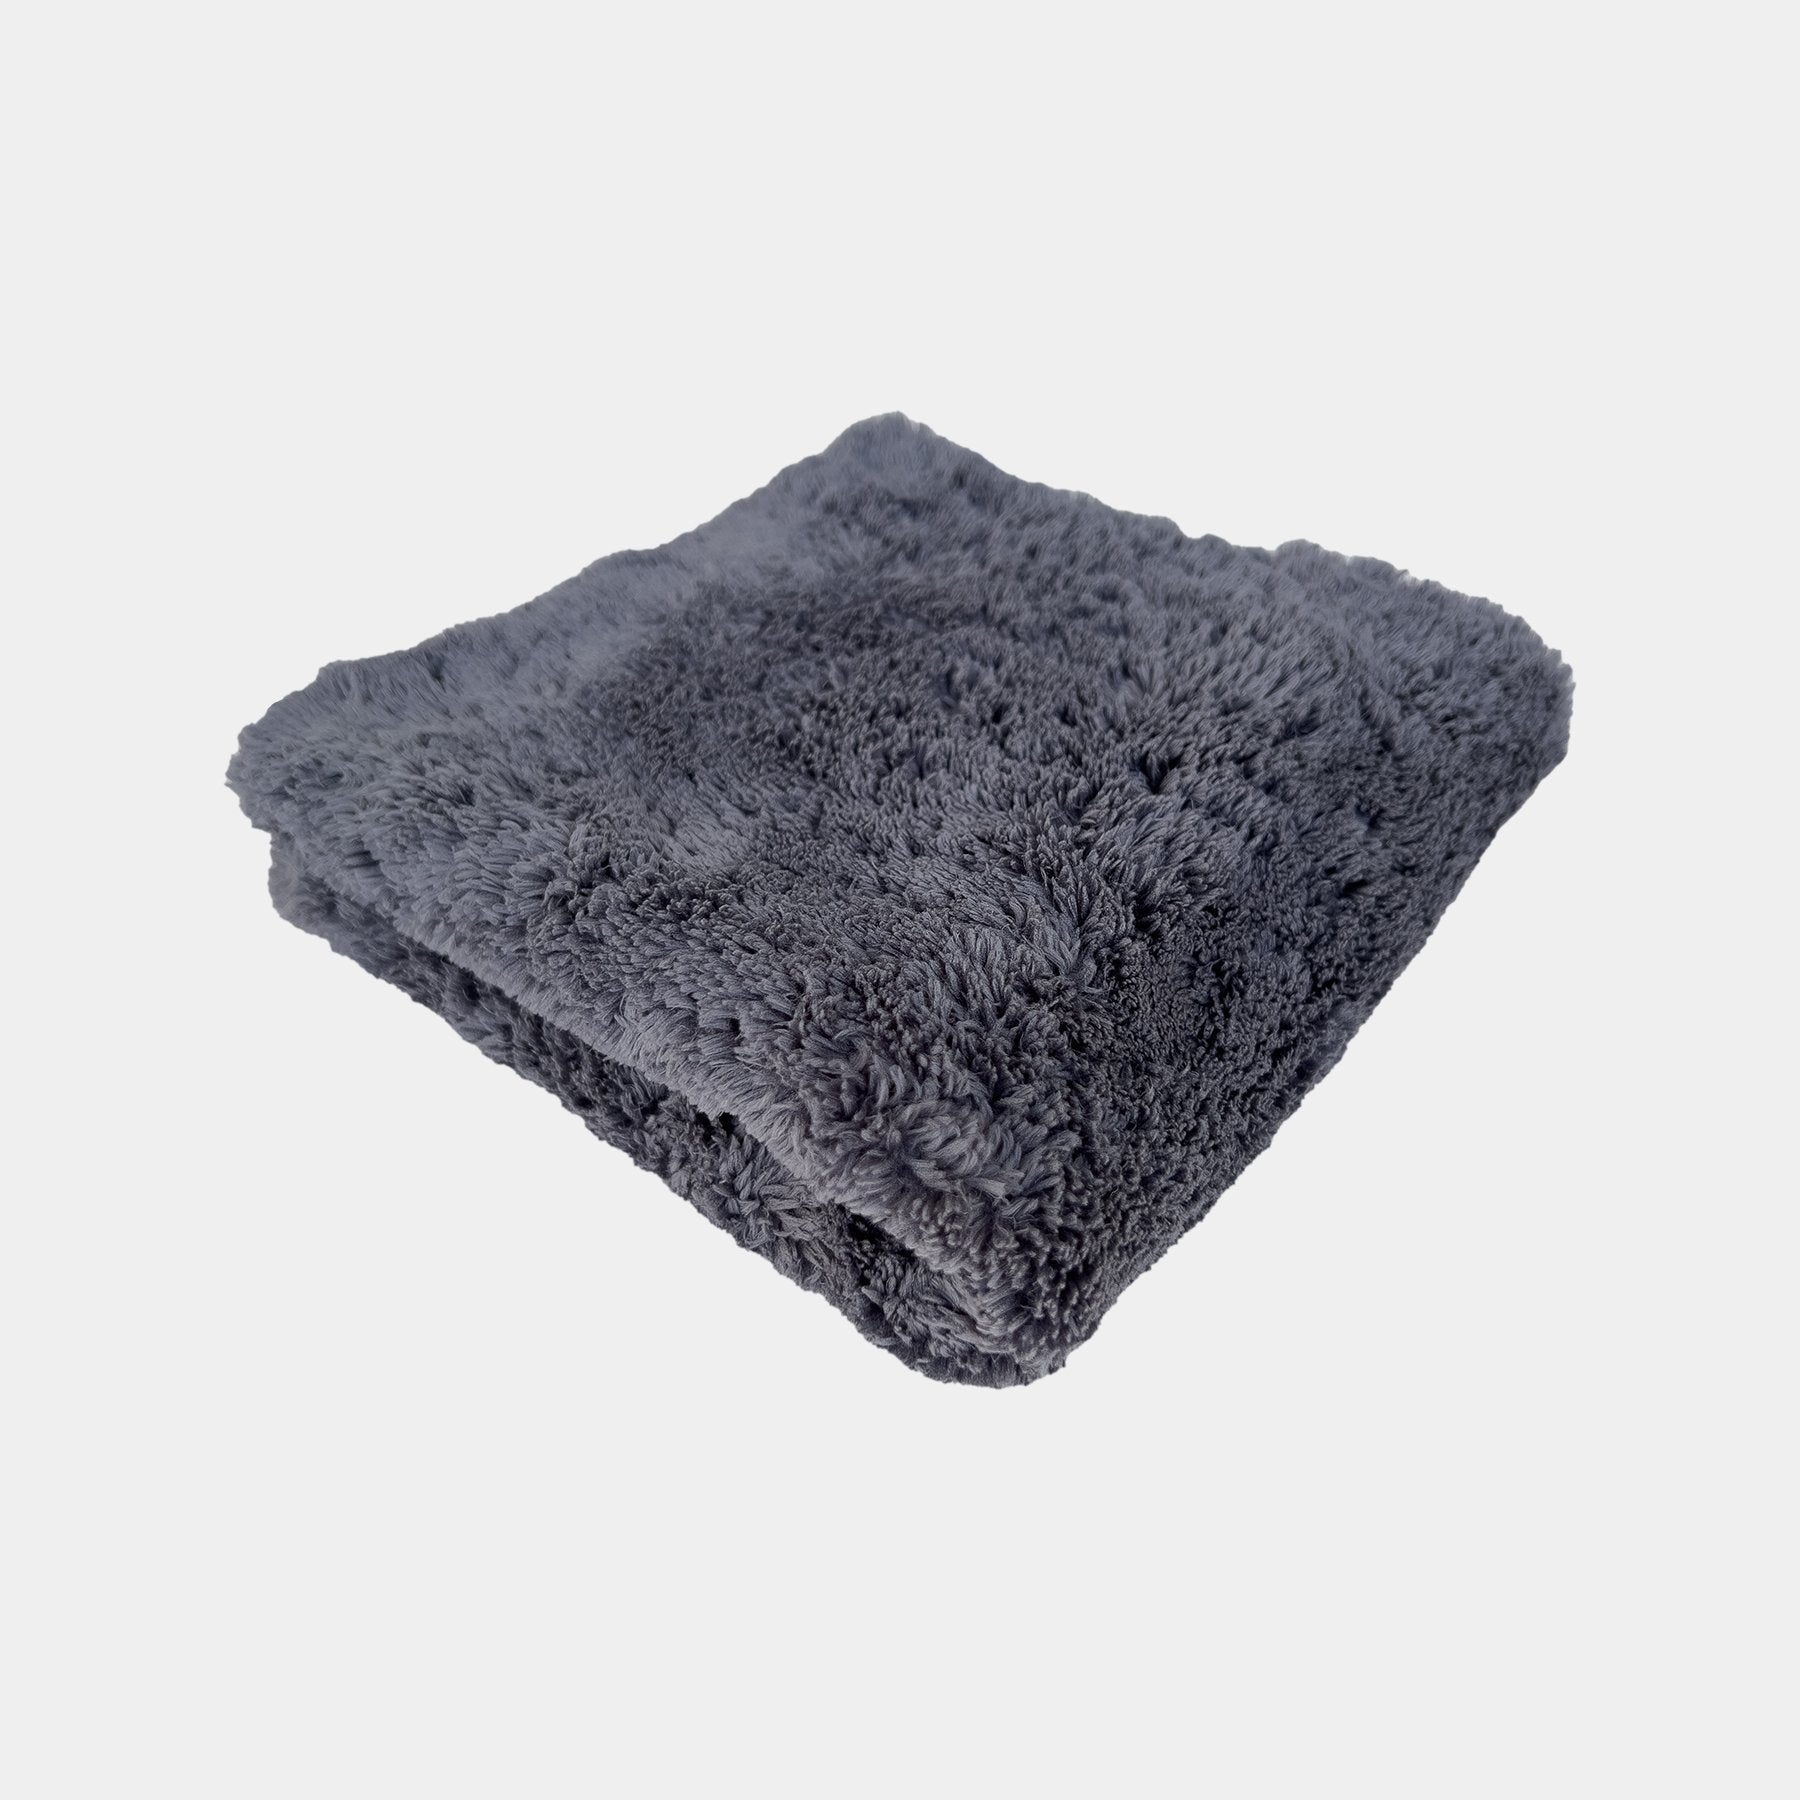 Car care plush grey microfibre cloth displayed on a white background.